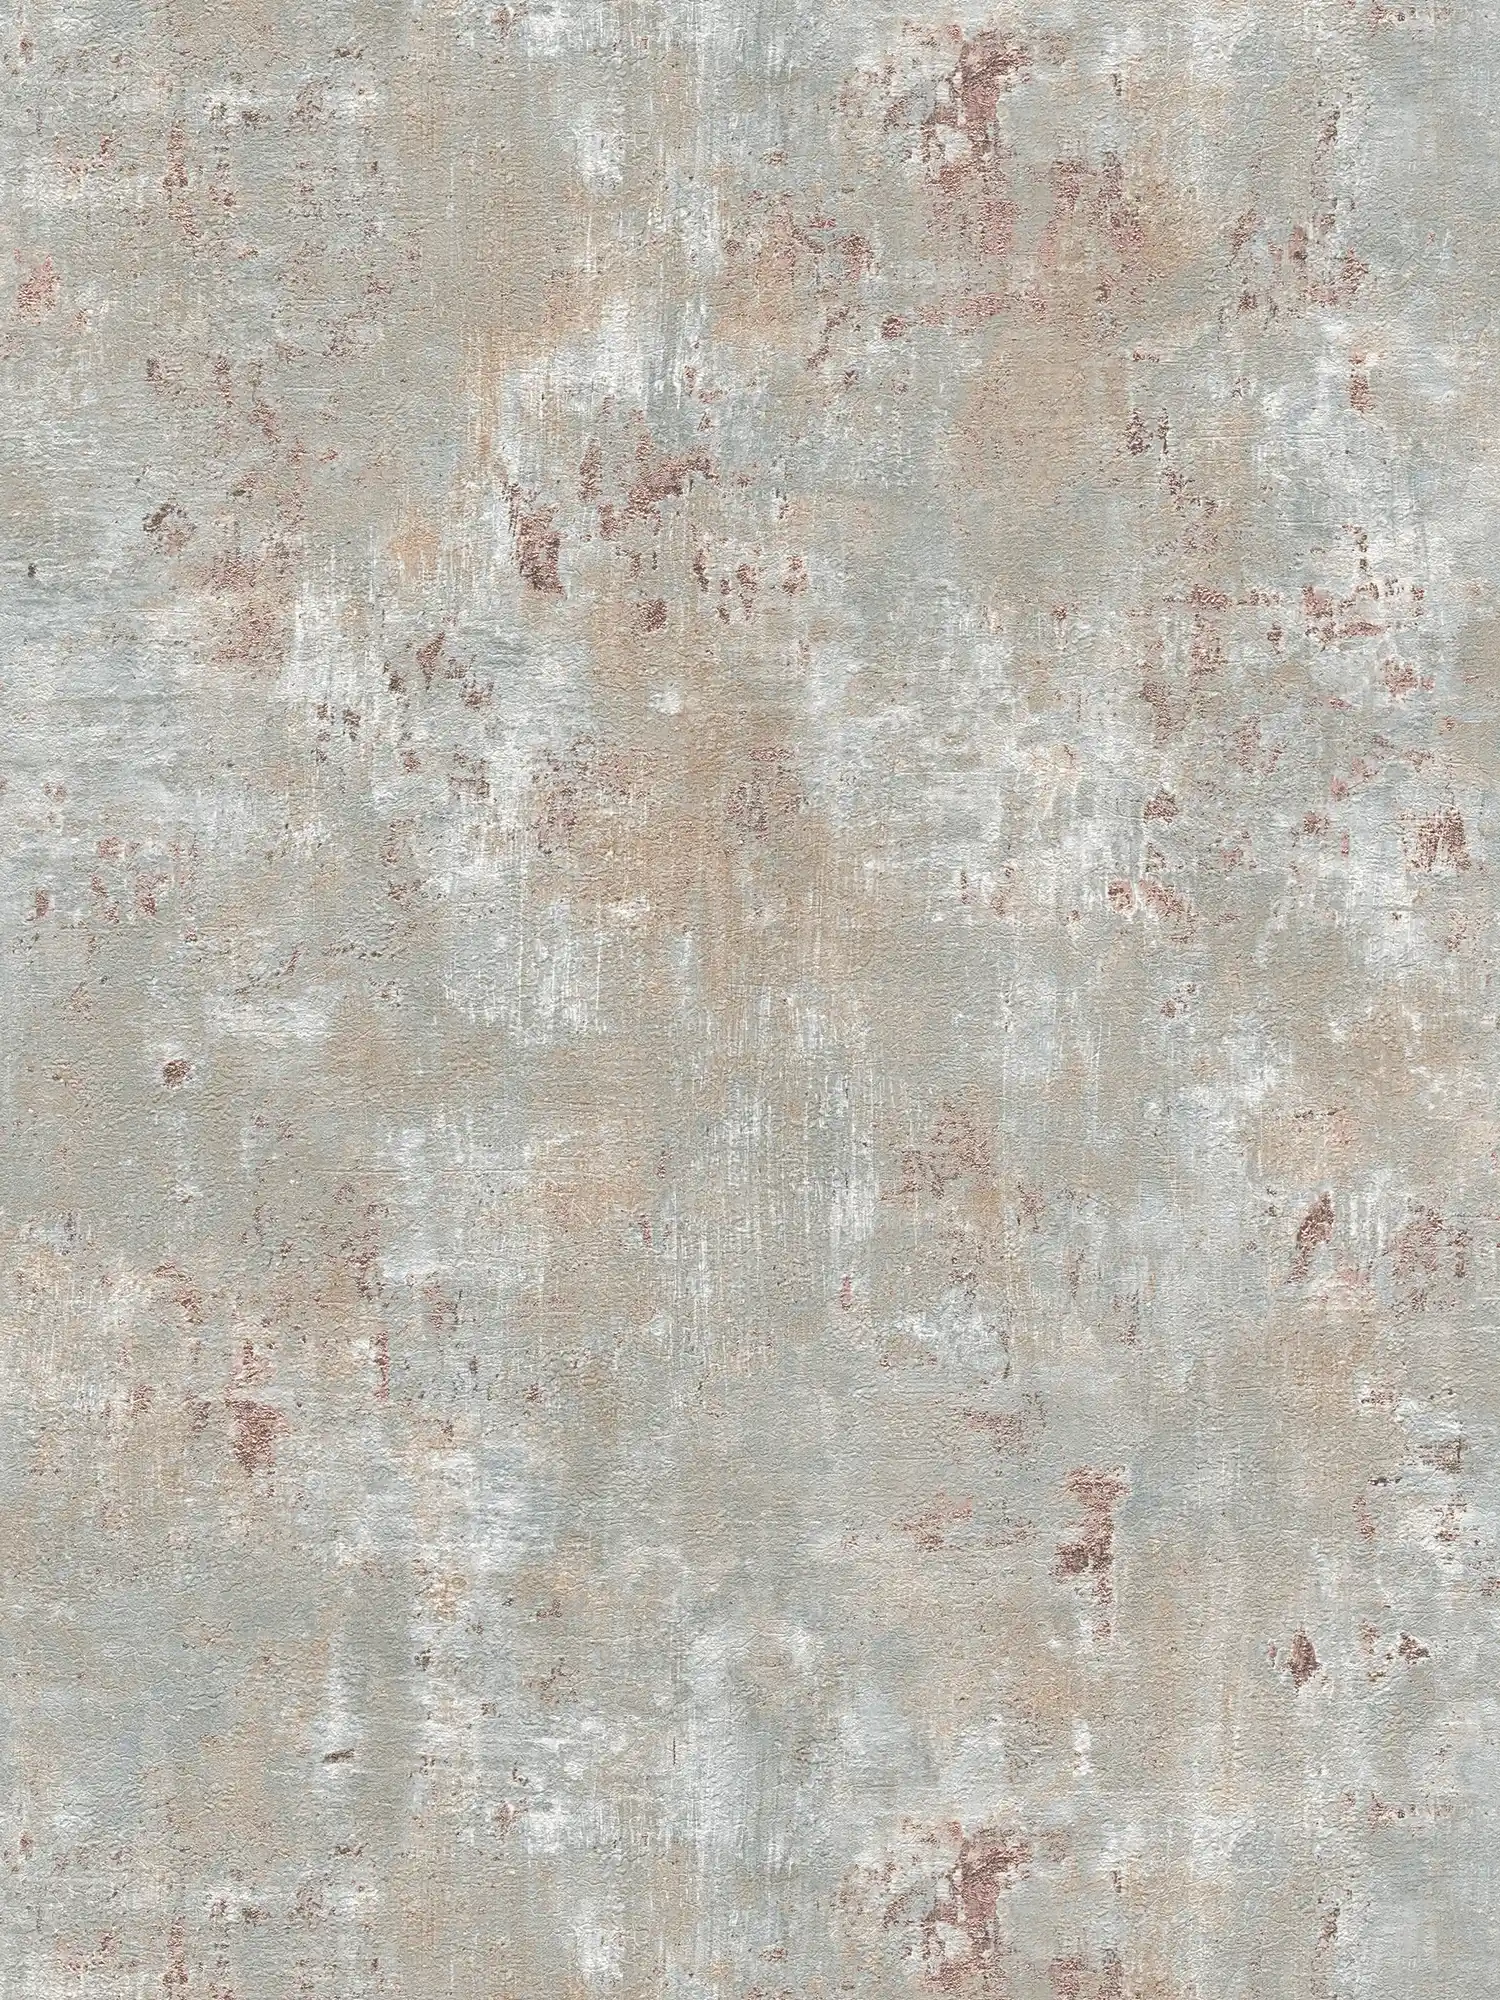 Non-woven wallpaper in used look with metallic accents - grey, blue, bronze
